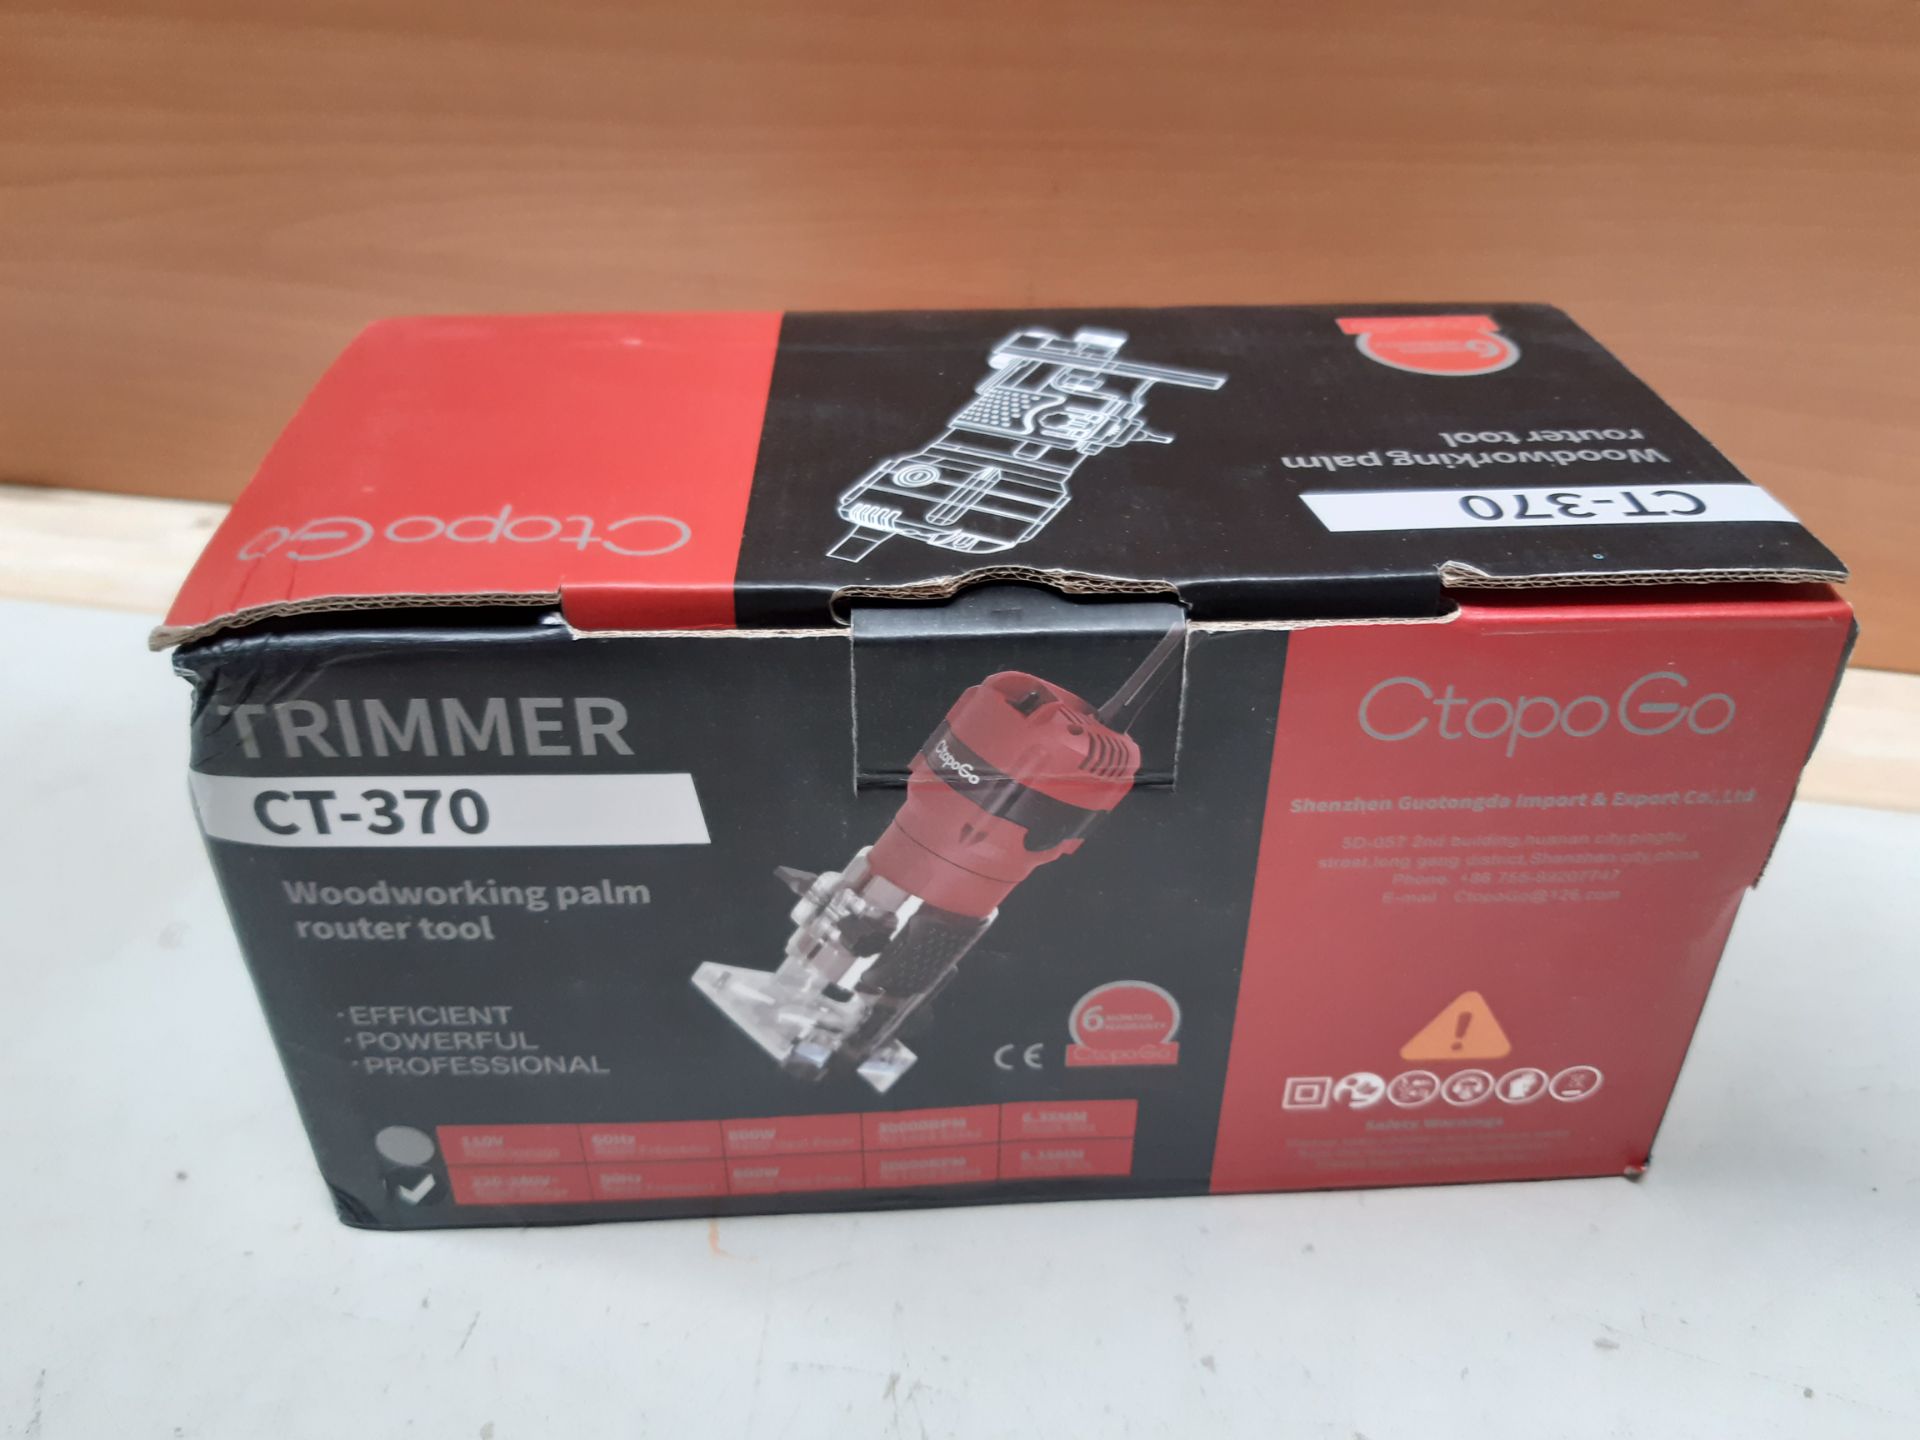 RRP £59.99 CtopoGo Compact Wood Palm Router Tool Hand Edge Trimmer - Image 2 of 2